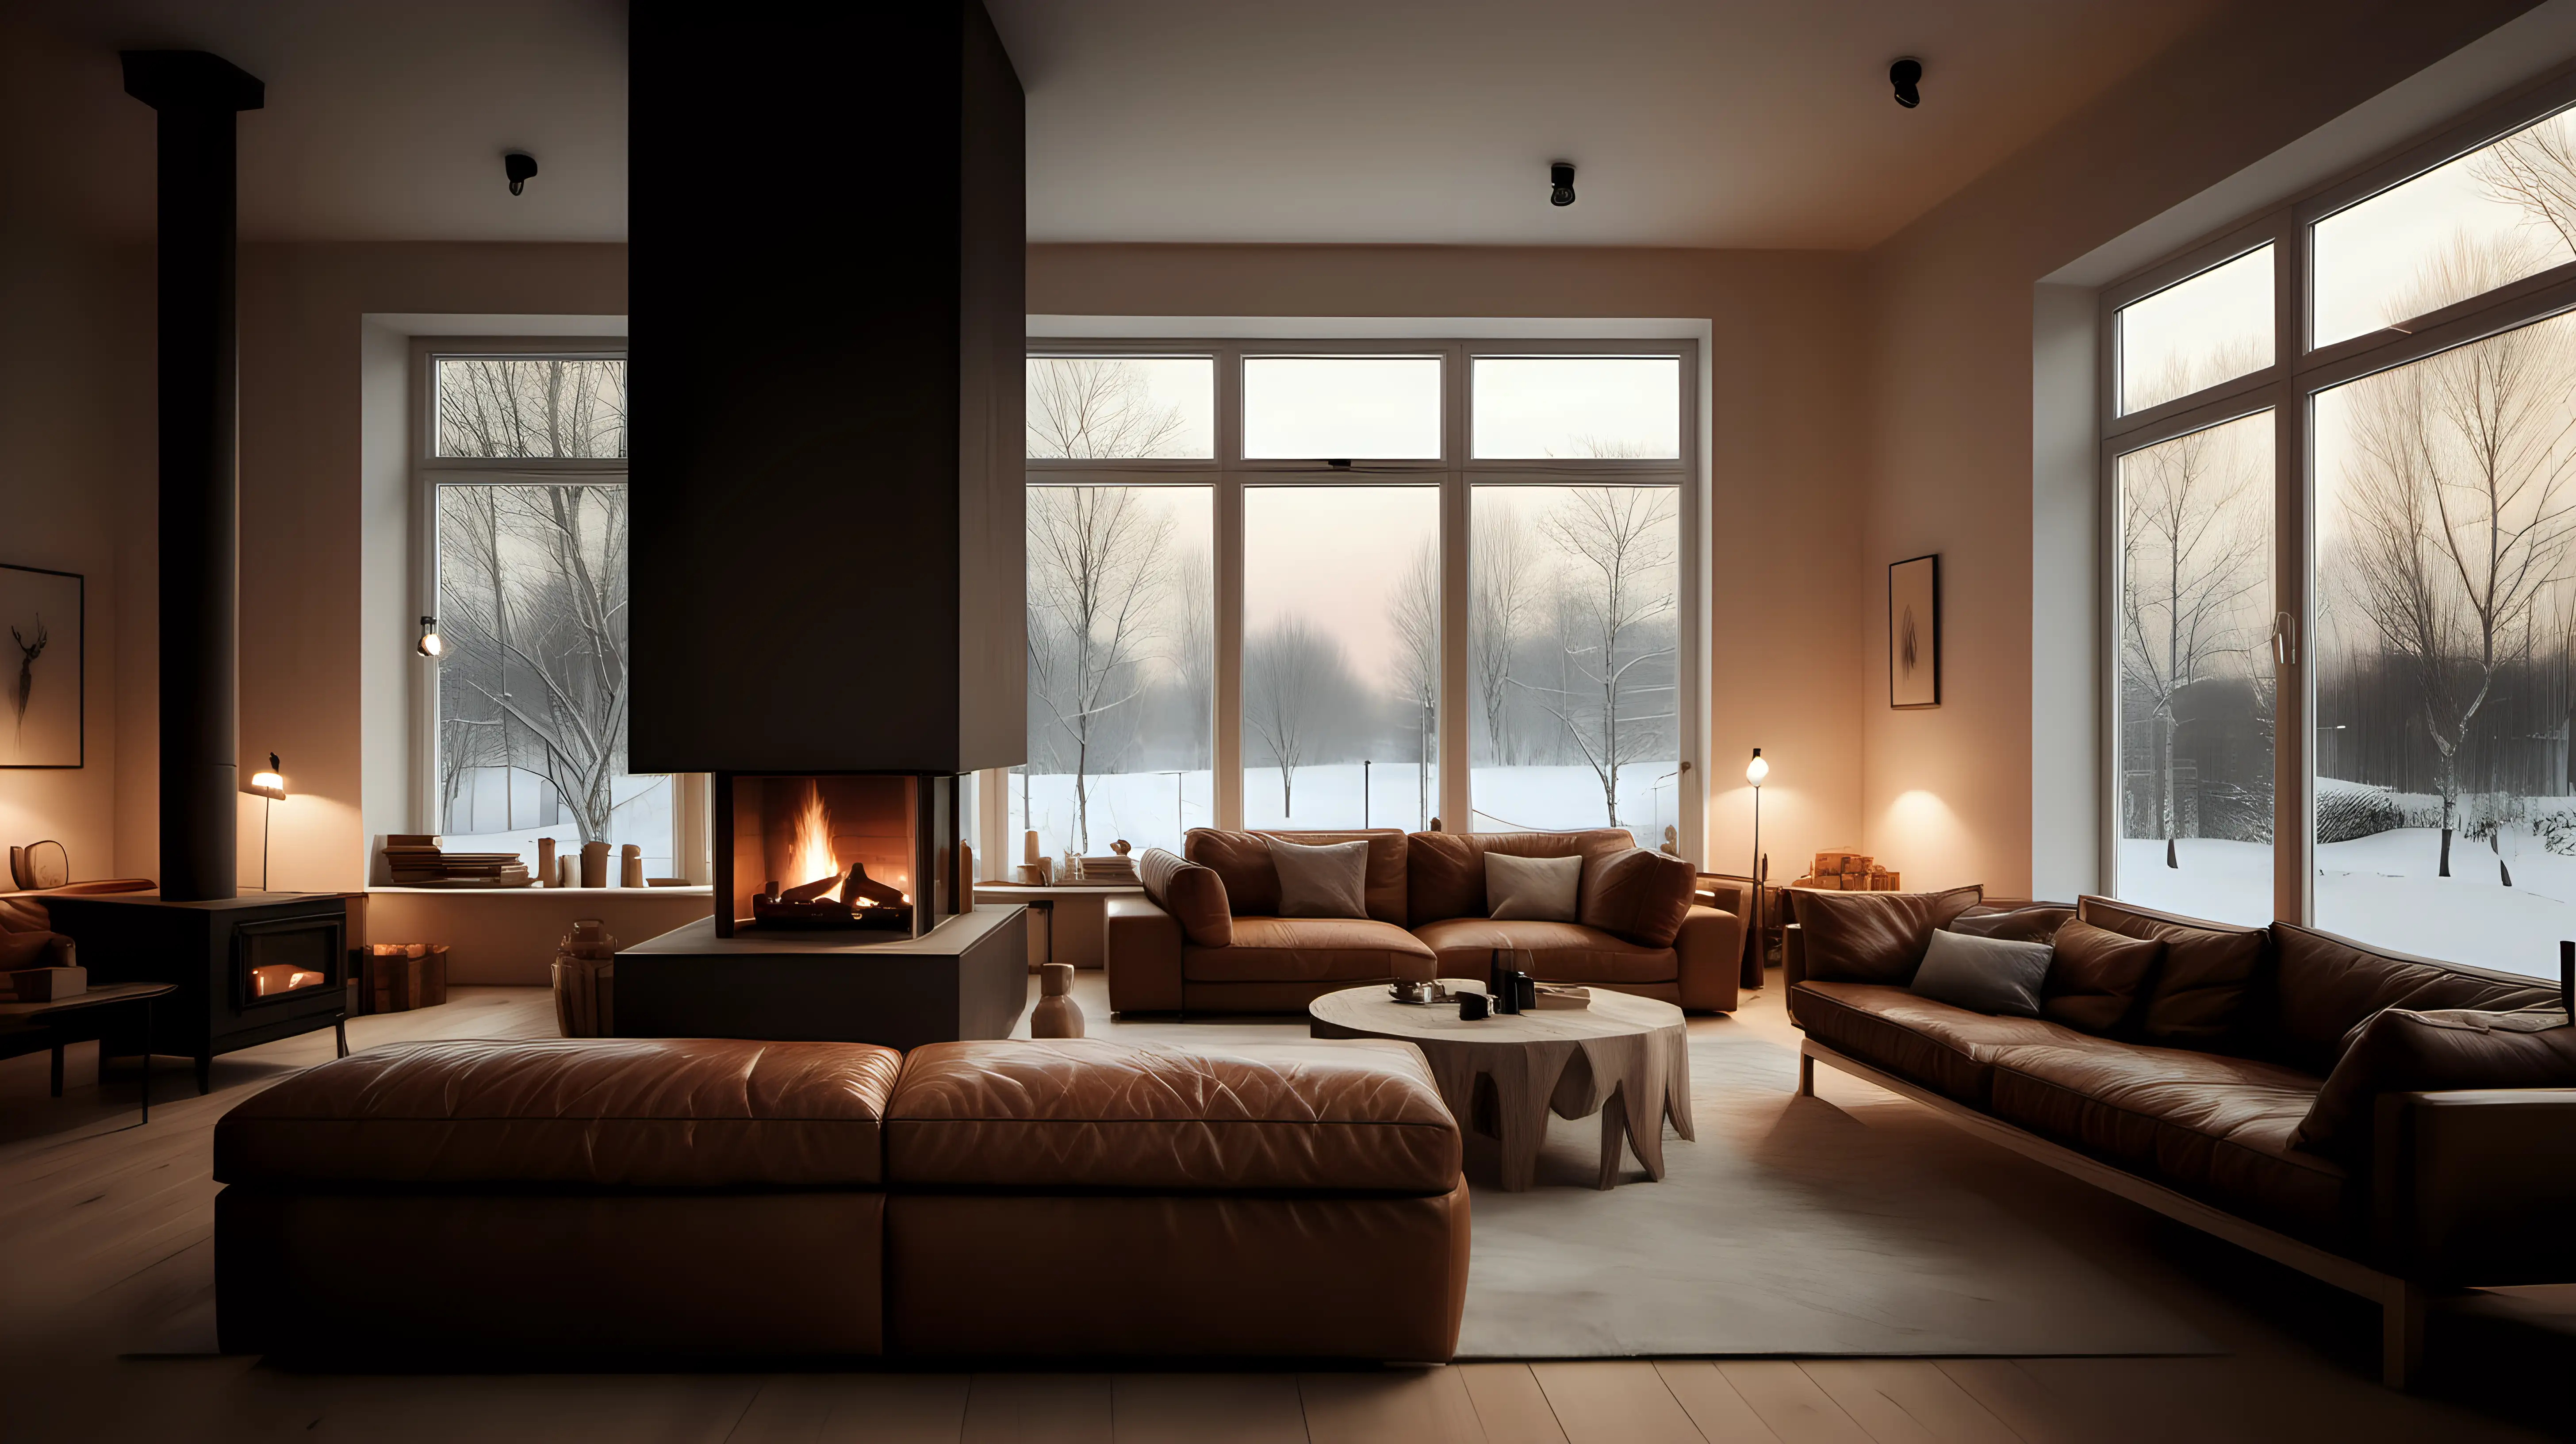 A nordic living room with leather furniture and a central fireplace and a large window. Warm lighting, photographic quality.